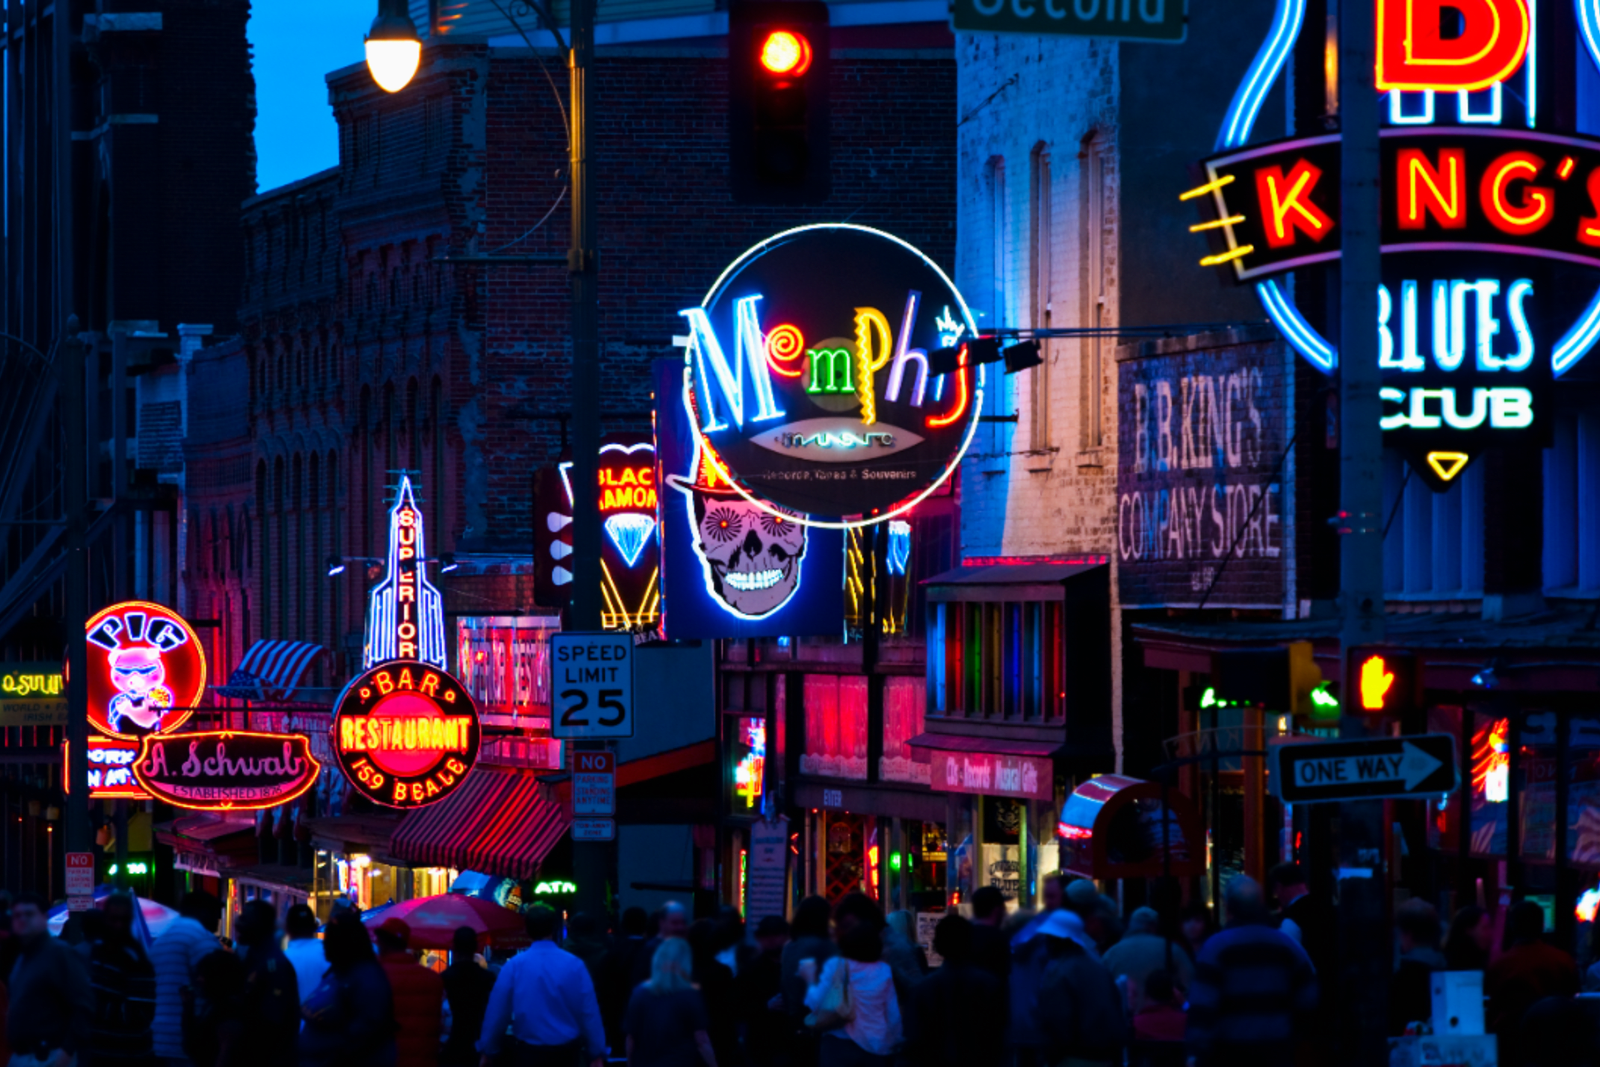 Solo travellers will love spending time in Memphis, Tennessee